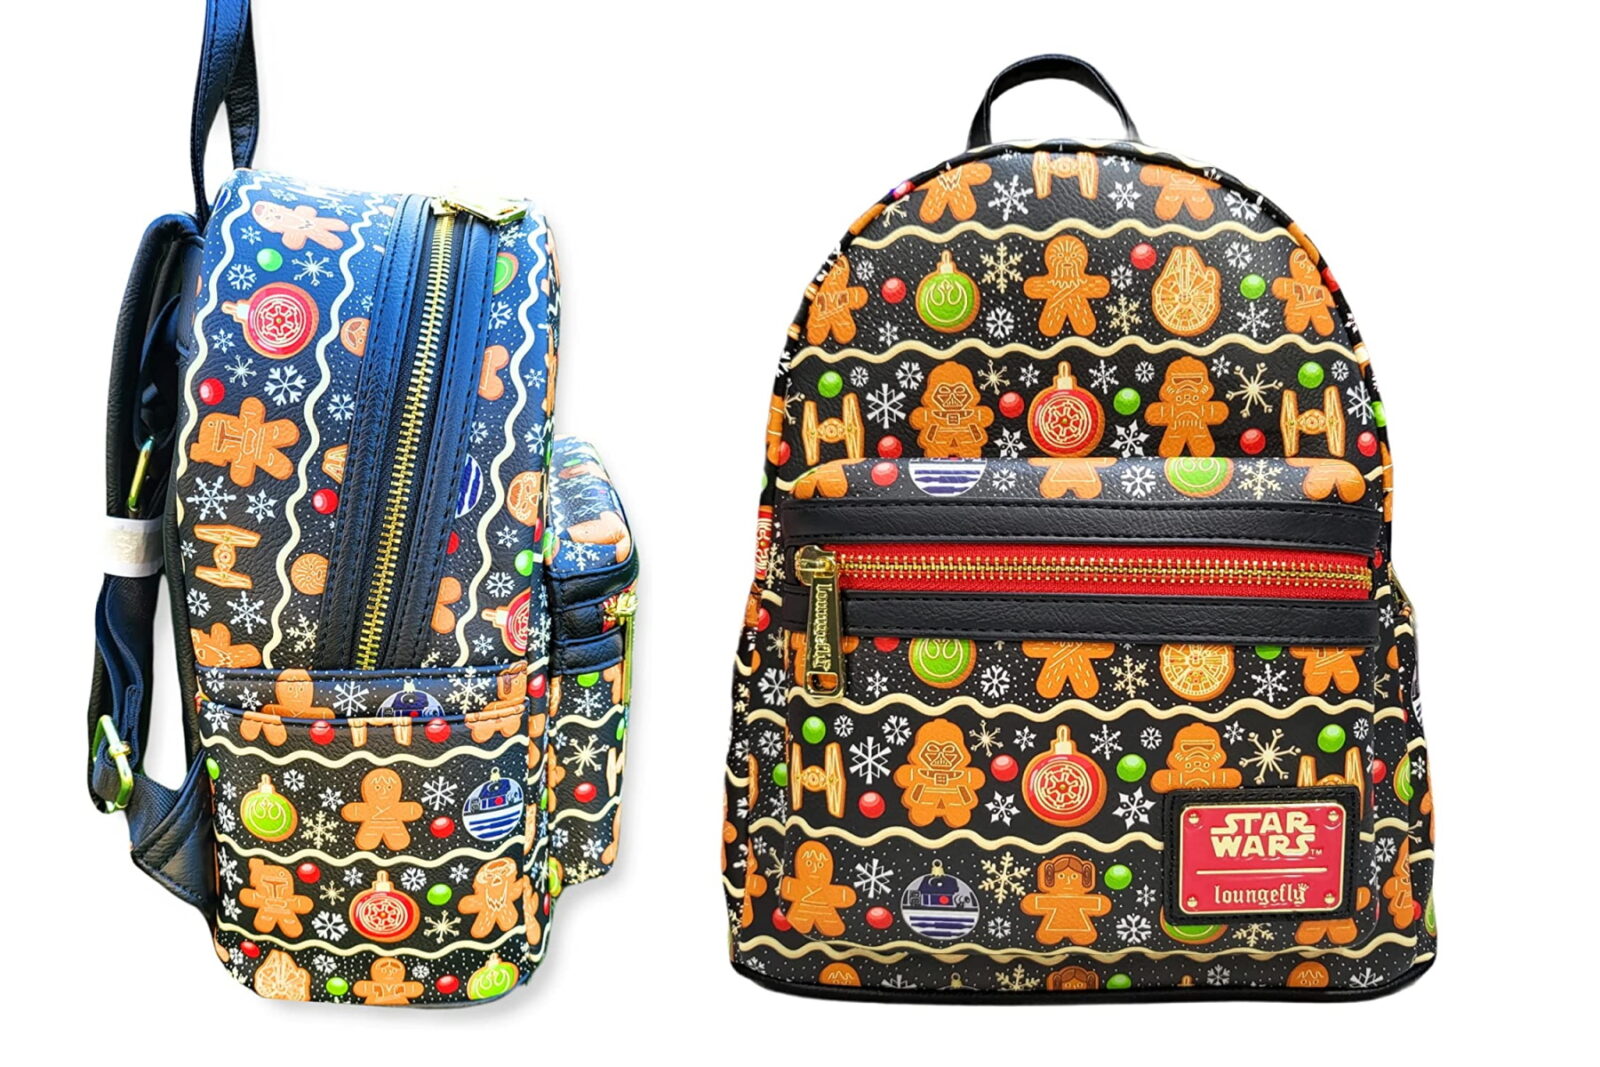 Loungefly x Star Wars Gingerbread Backpack